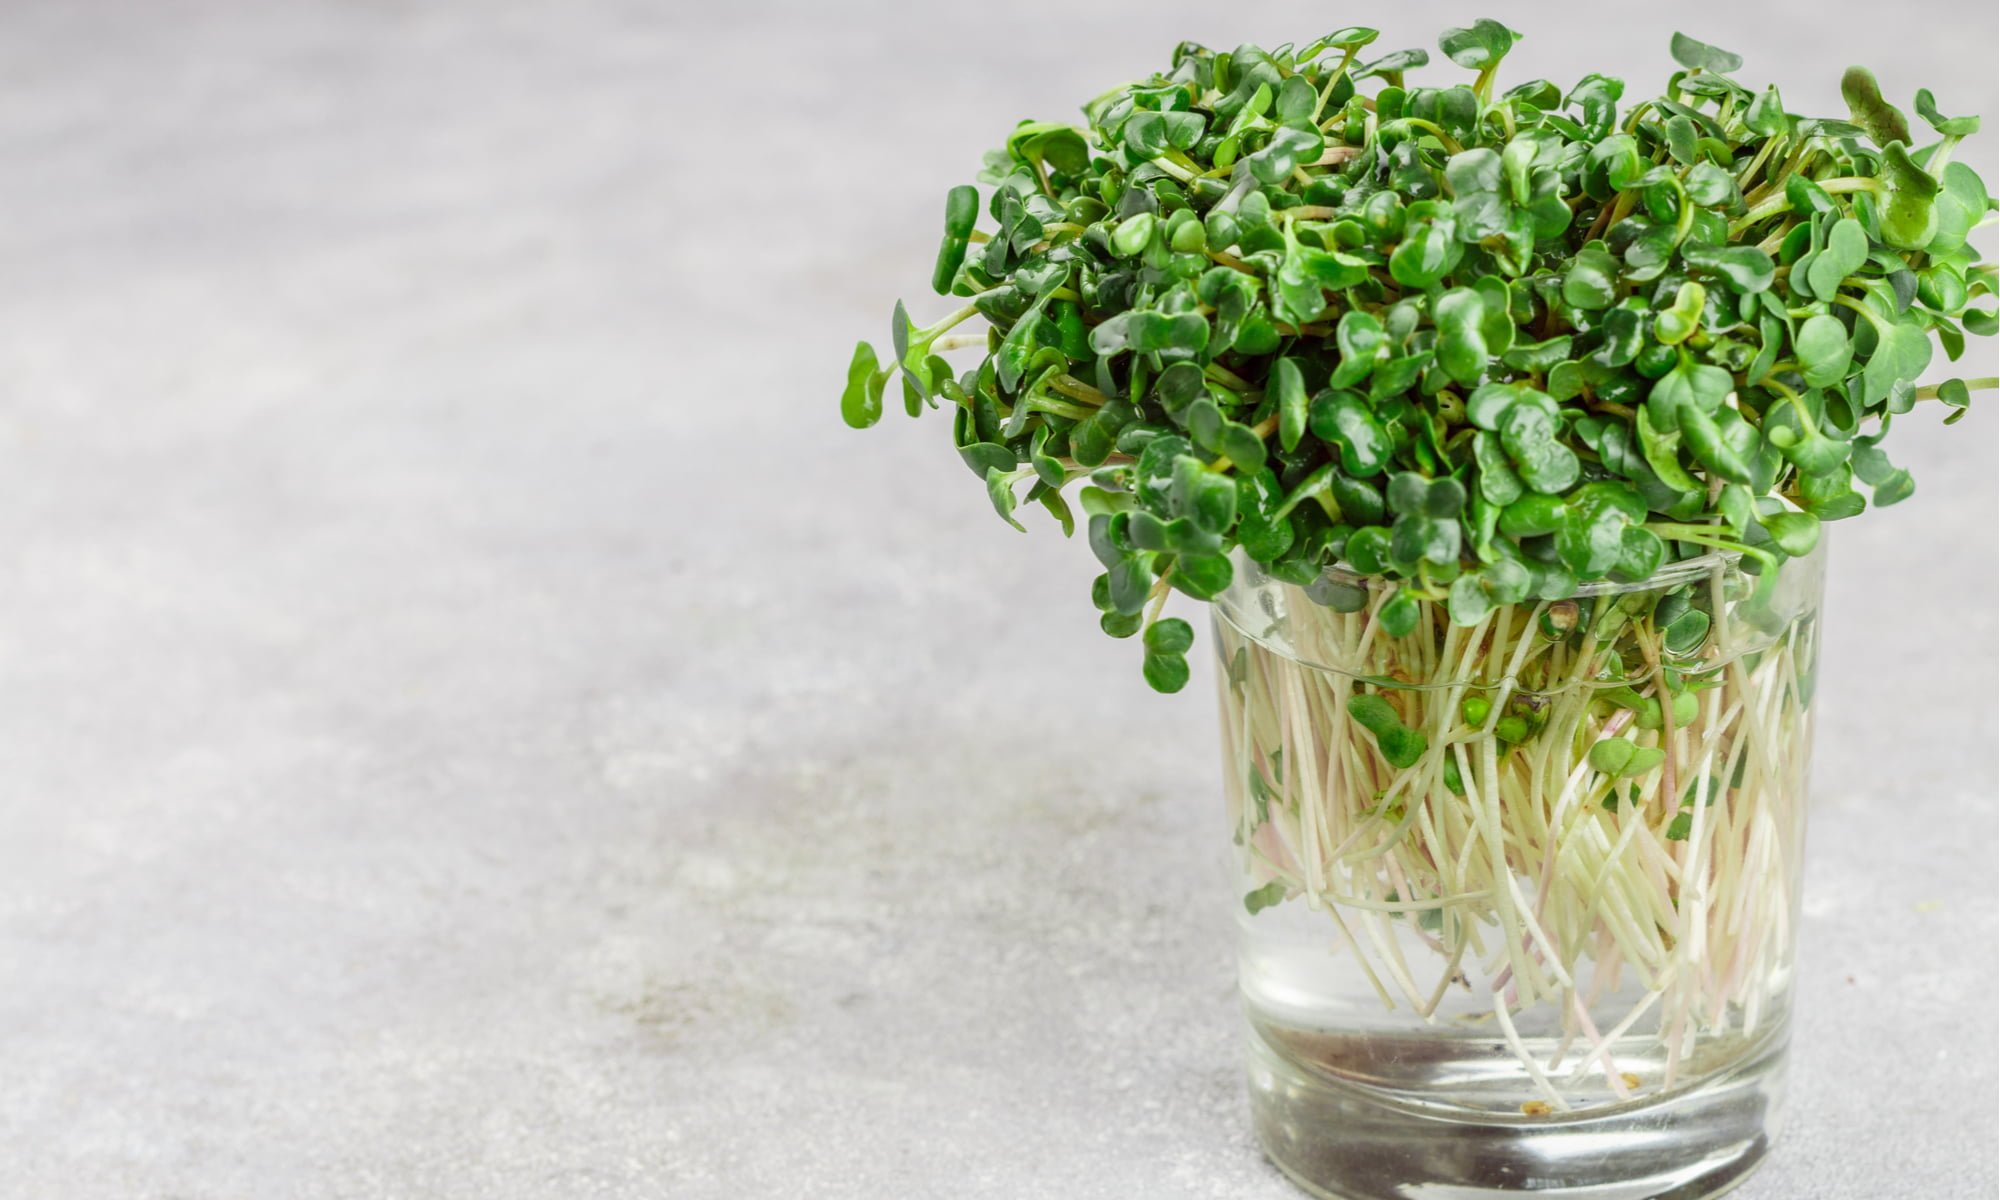 Microgreens: Are They Worth The Extra Penny?